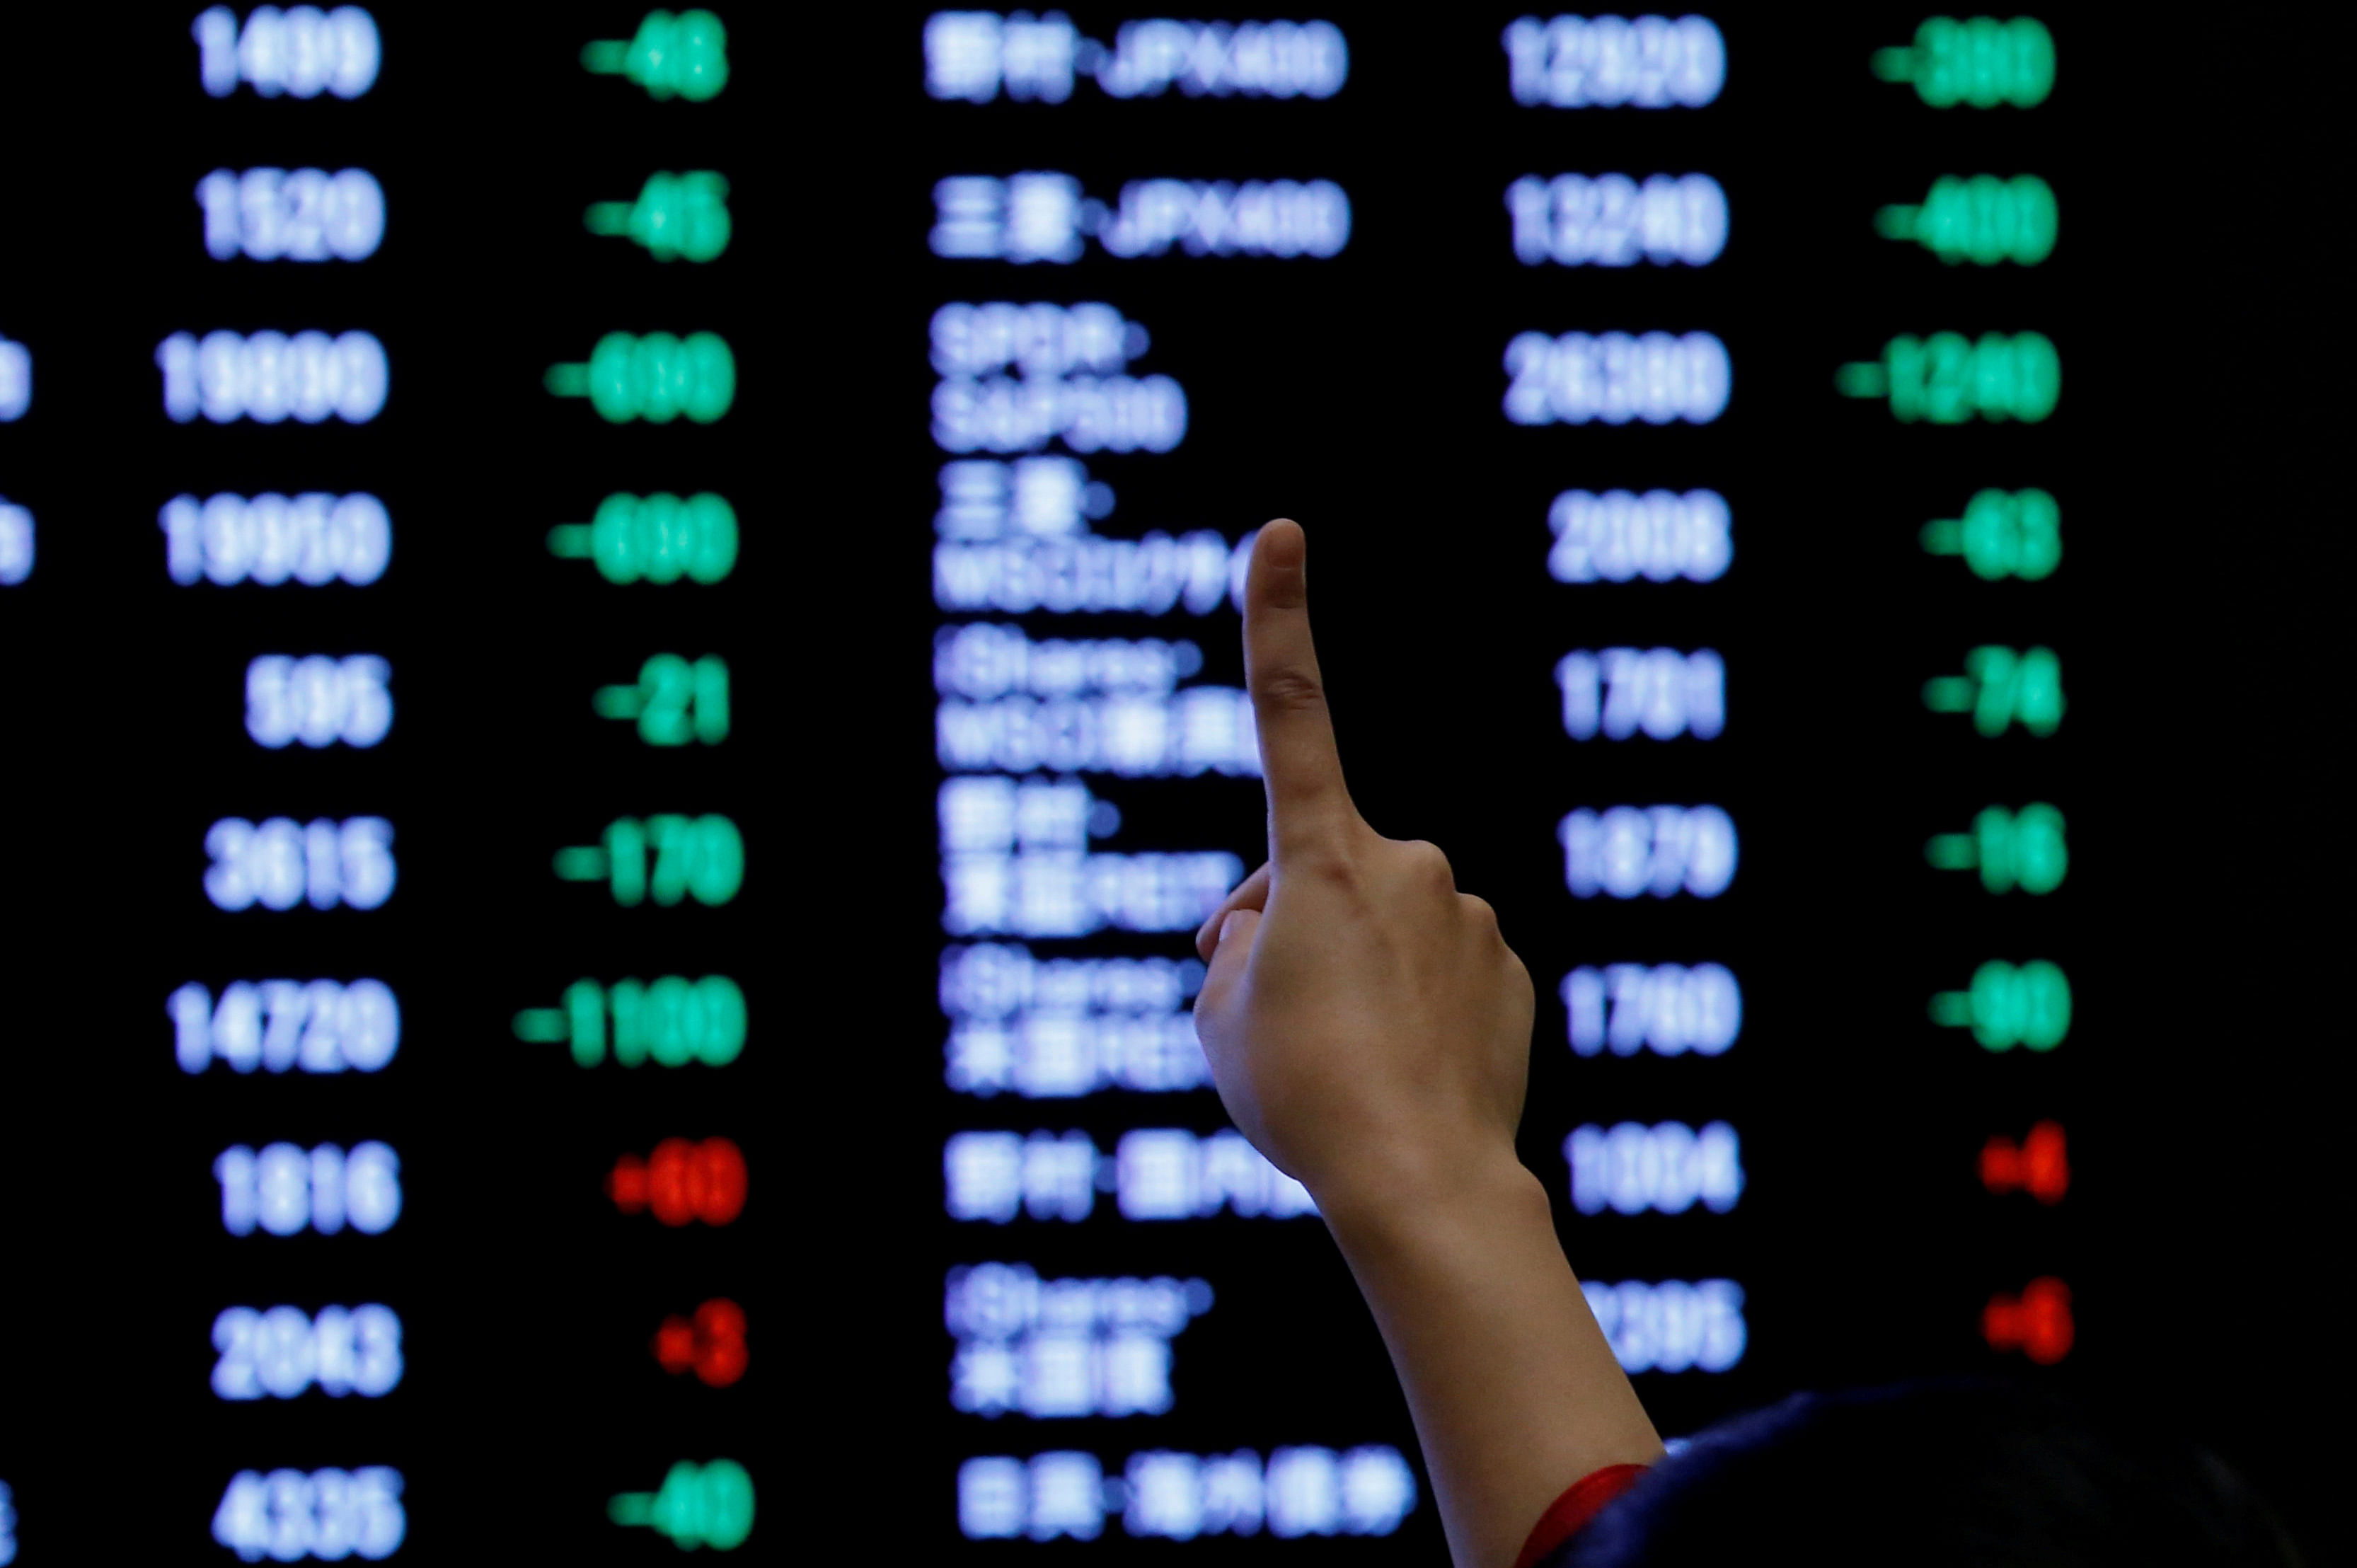  A woman points to an electronic board showing stock prices as she poses in front of the board after the New Year opening ceremony at the Tokyo Stock Exchange (TSE), held to wish for the success of Japan's stock market, in Tokyo, Japan, January 4, 2019. (Reuters Photo)